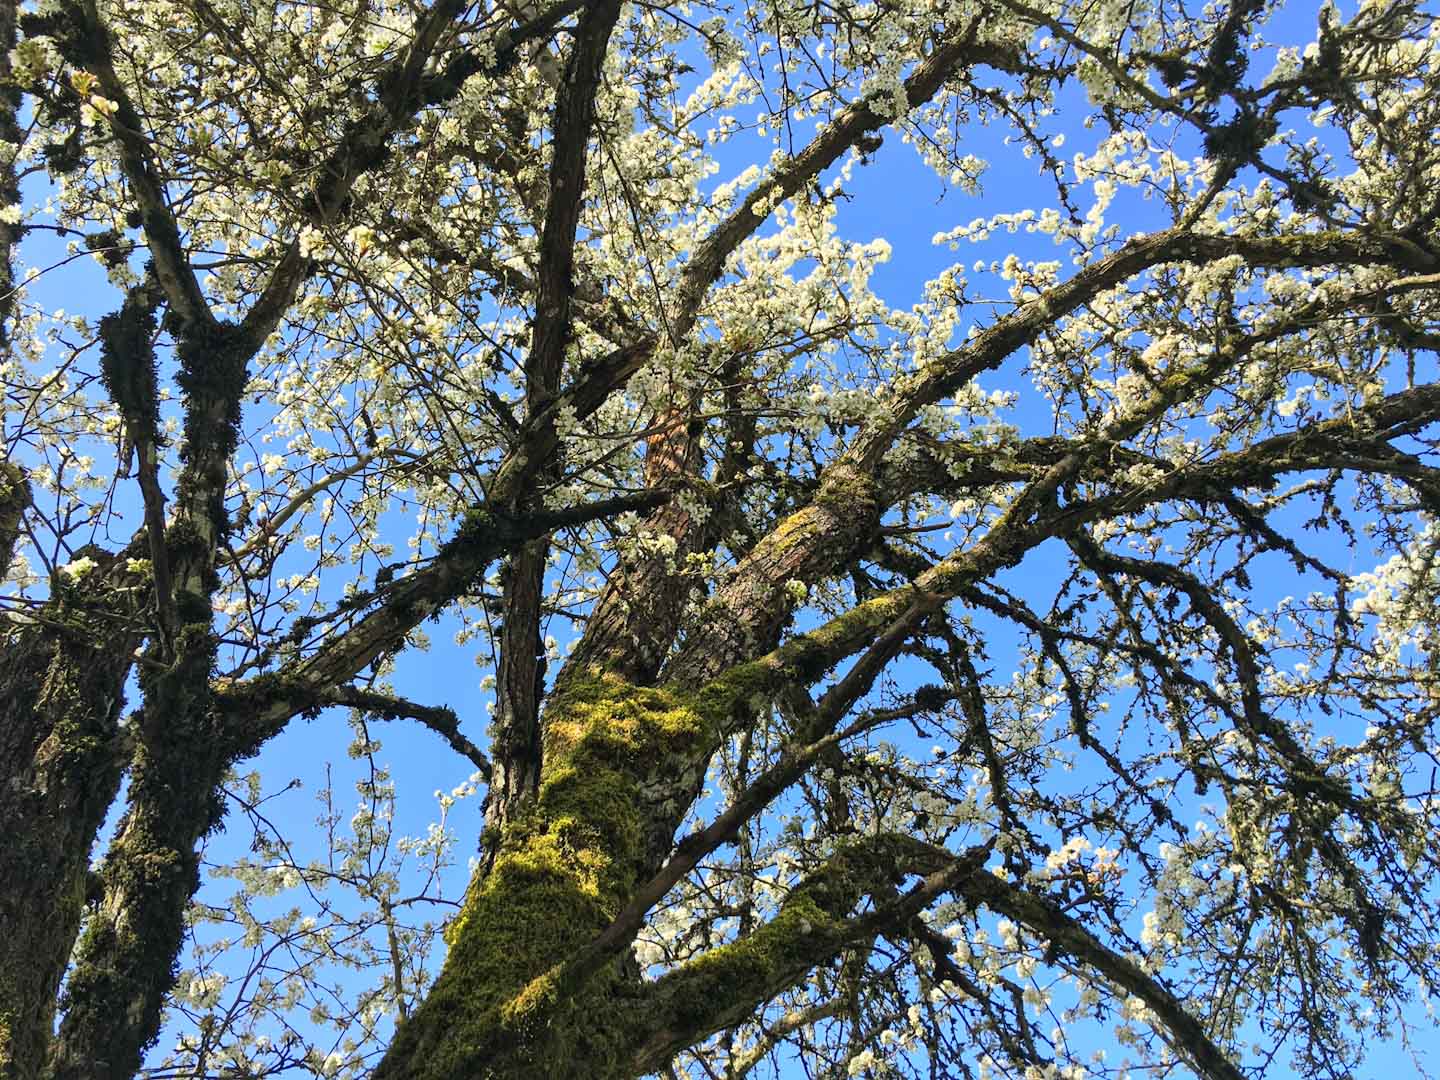 Photograph of tree with white blooms against blue sky in Tualatin Oregon close to the art studio of Talya Johnson